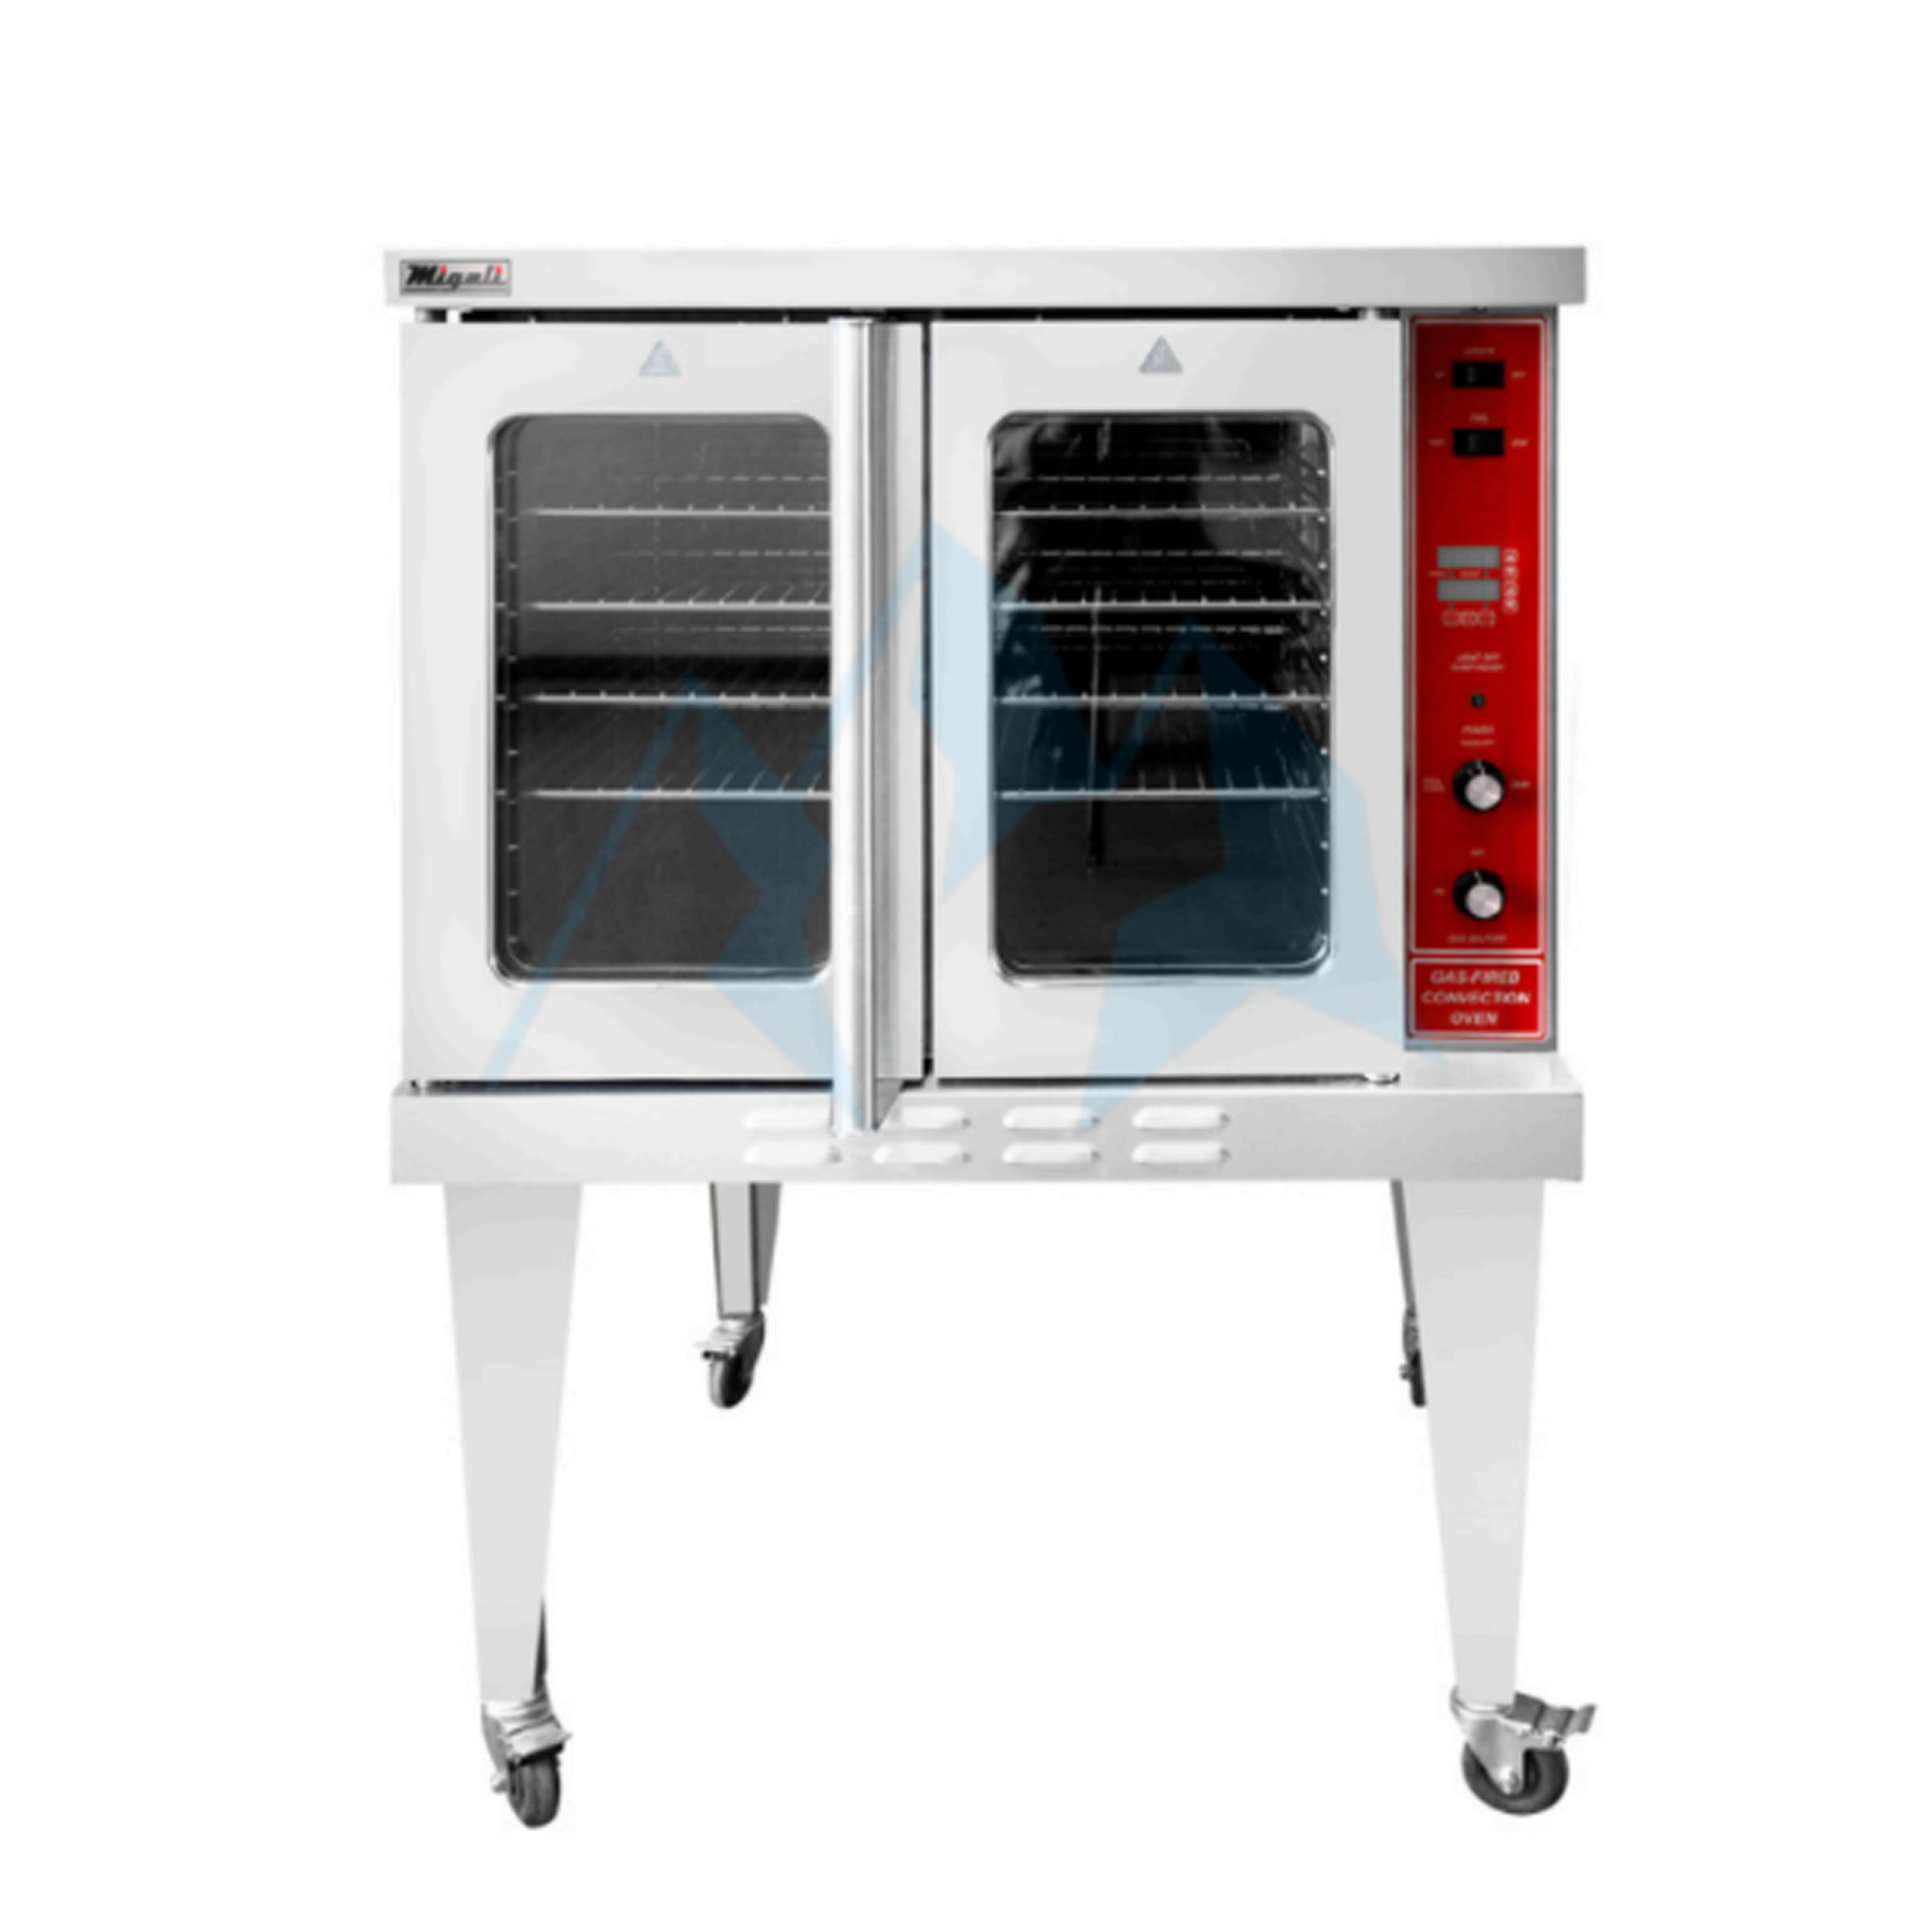 Migali - C-C01-NG, Commercial 38" Single Convection Oven Natural Gas BTU’s 46,000